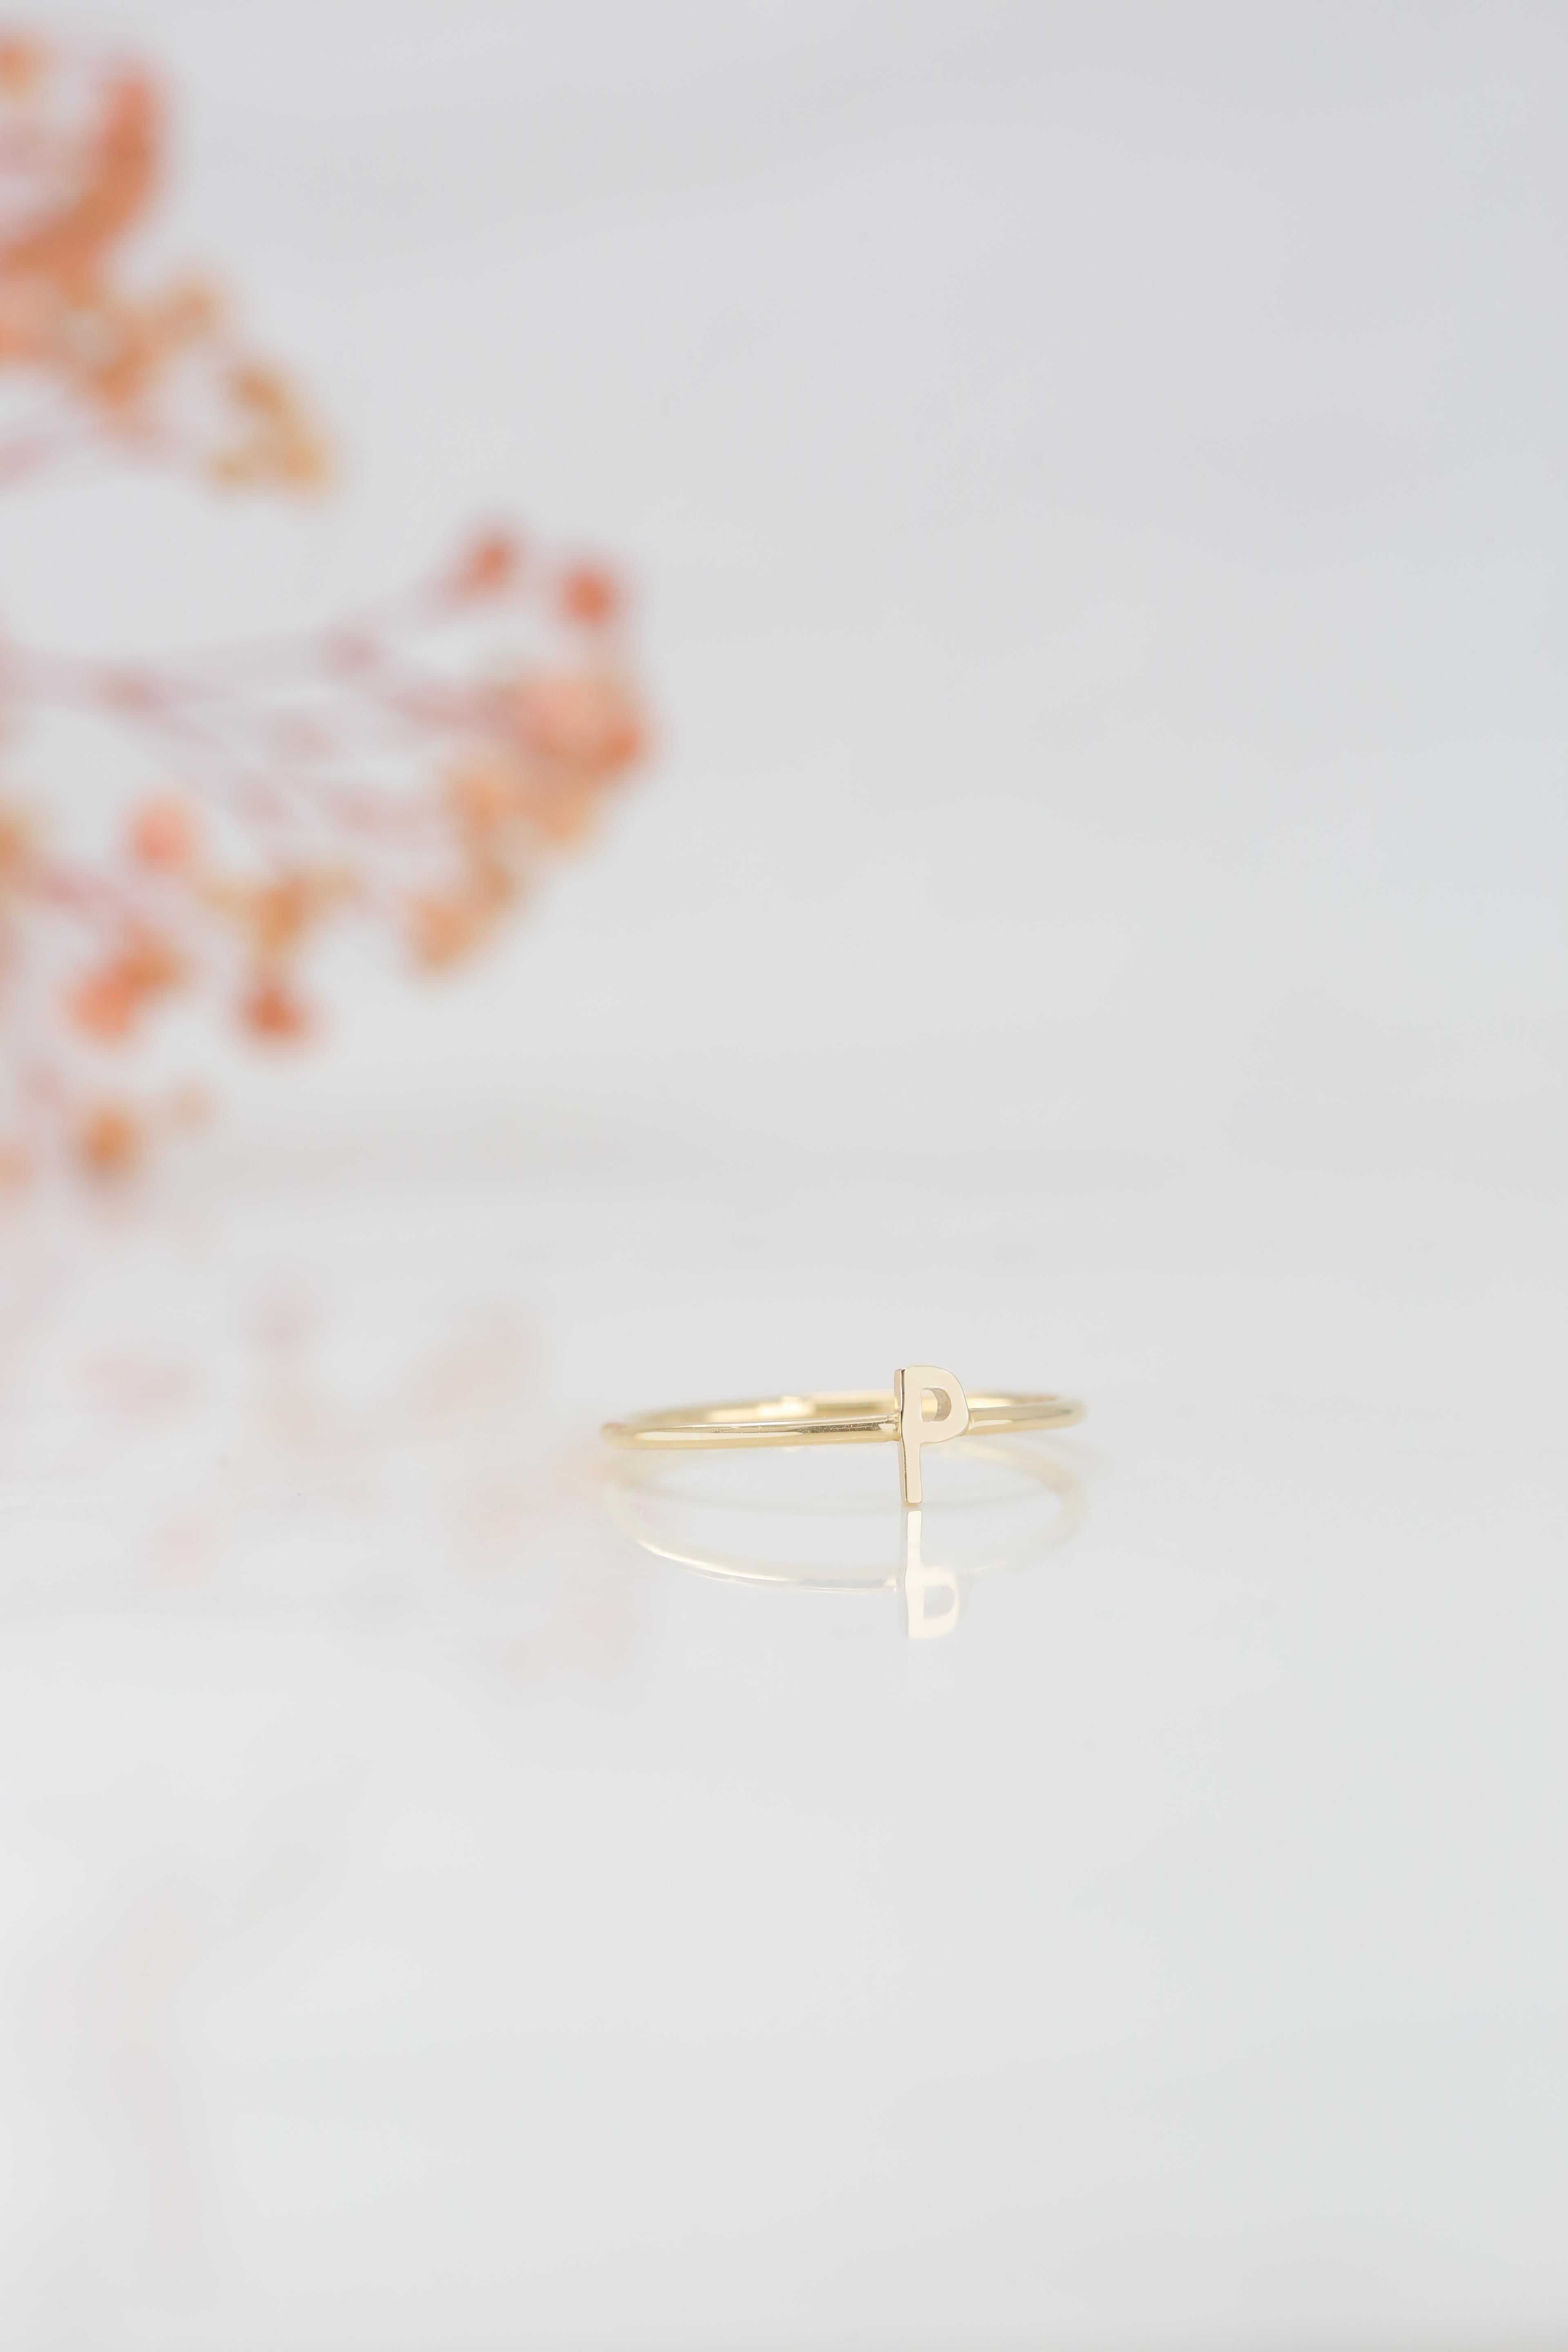 For Sale:  14K Gold Initial P Letter Ring, Personalized Initial Letter Ring 7